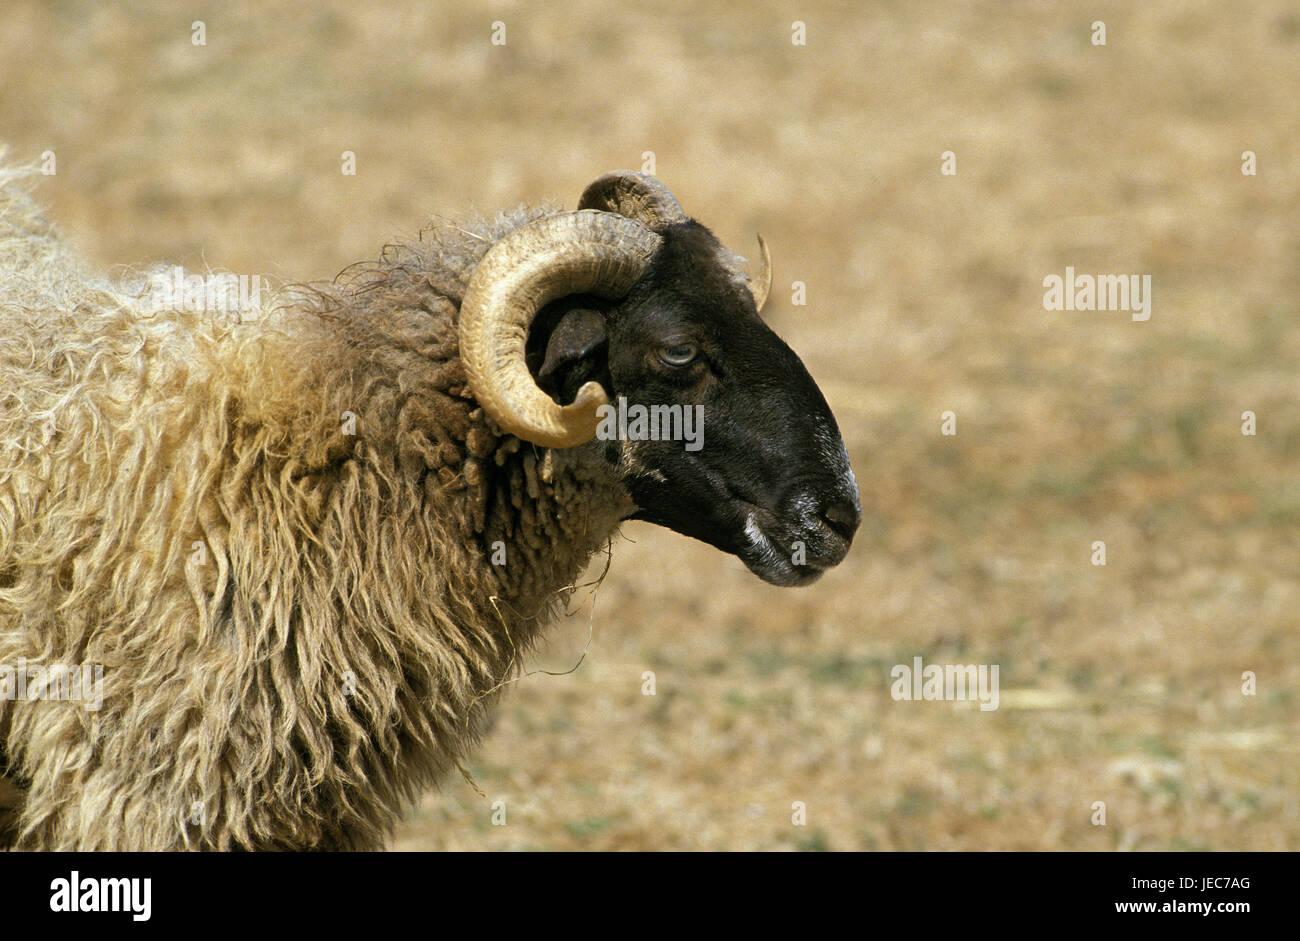 Sheep, Manech A Tete Rousse, red head-Manech, Aries, portrait, at the side, Stock Photo